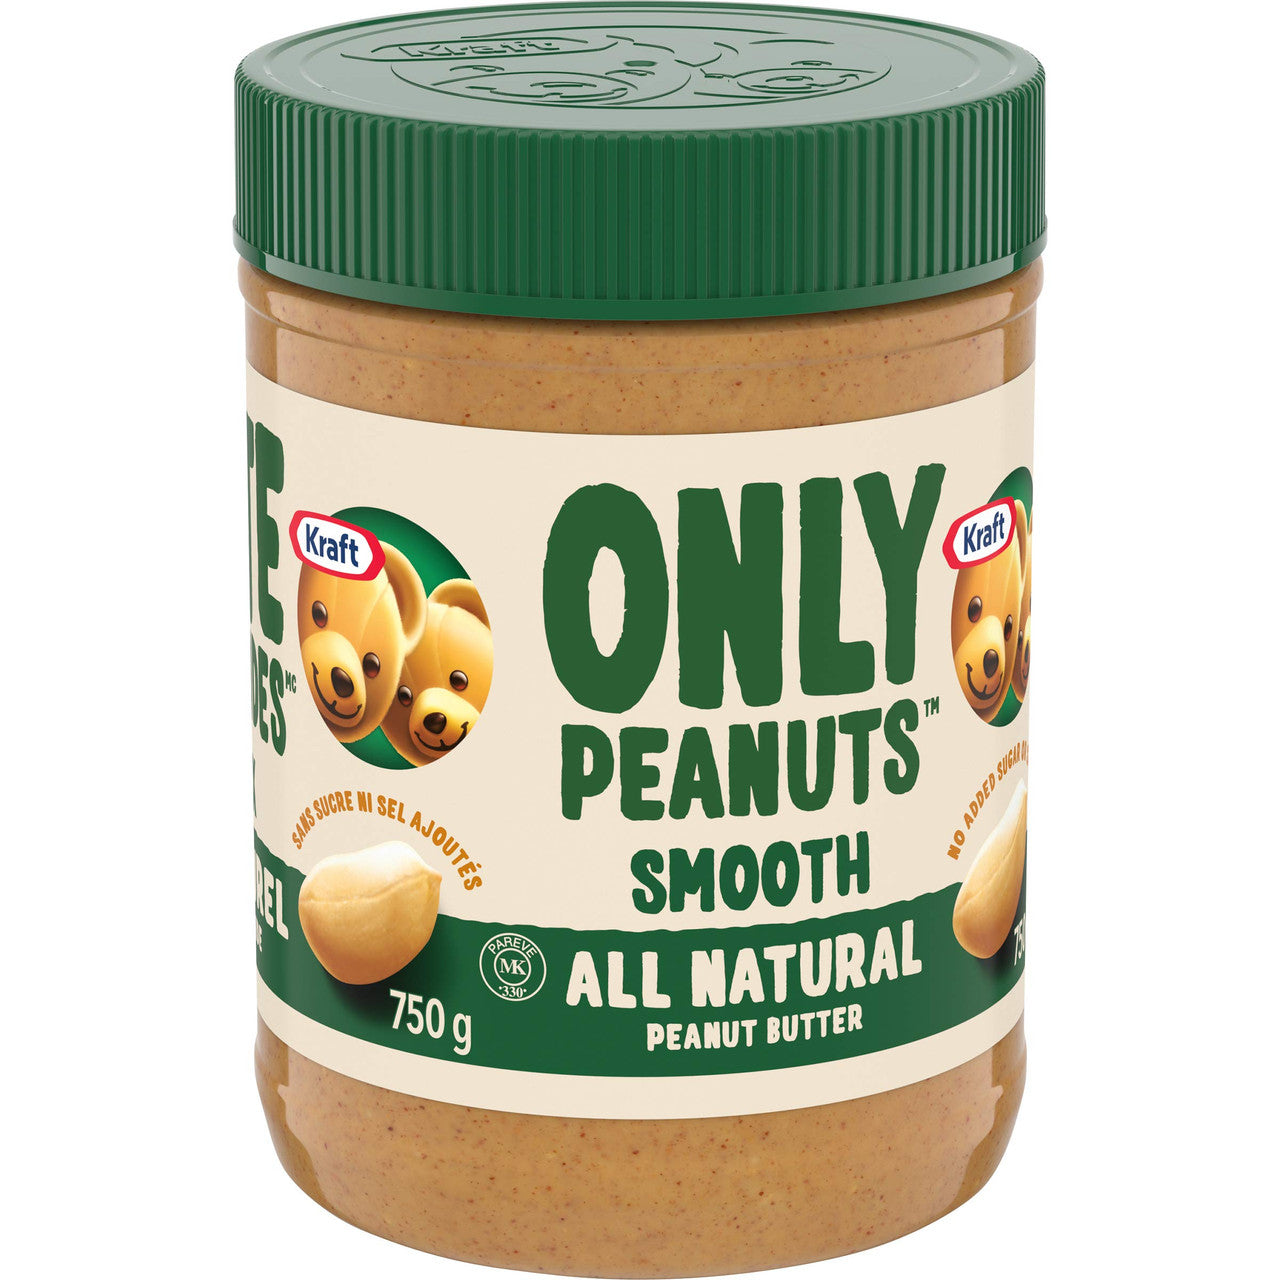 Kraft All Natural Smooth Peanut Butter 750g/26.5 oz., {Imported from Canada}